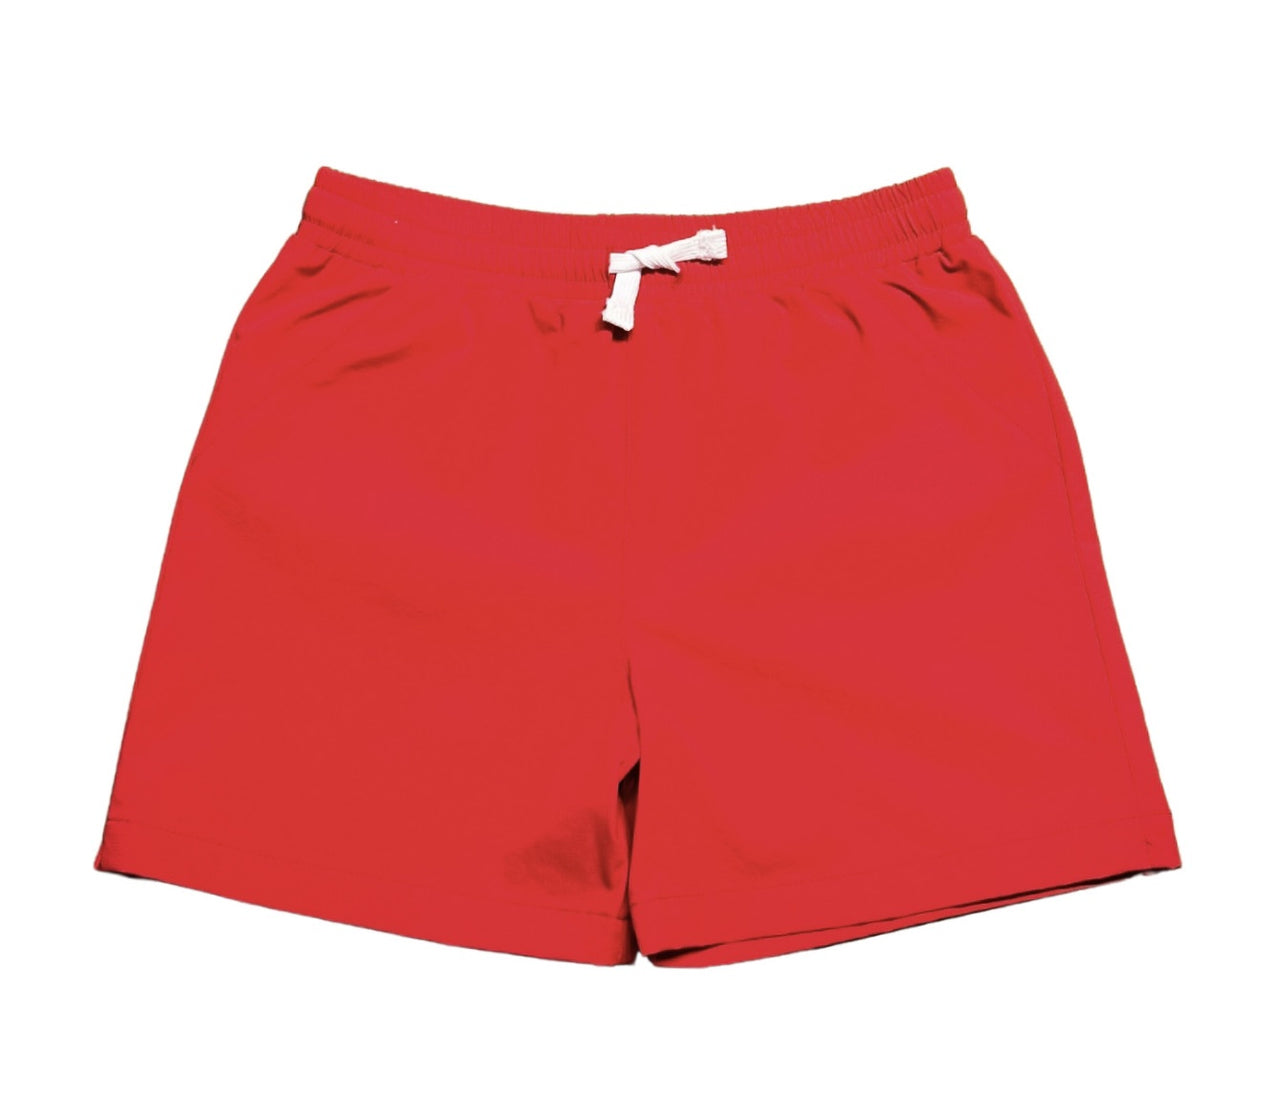 Saltwater Boys Topsail Performance Short Red 6055 5101